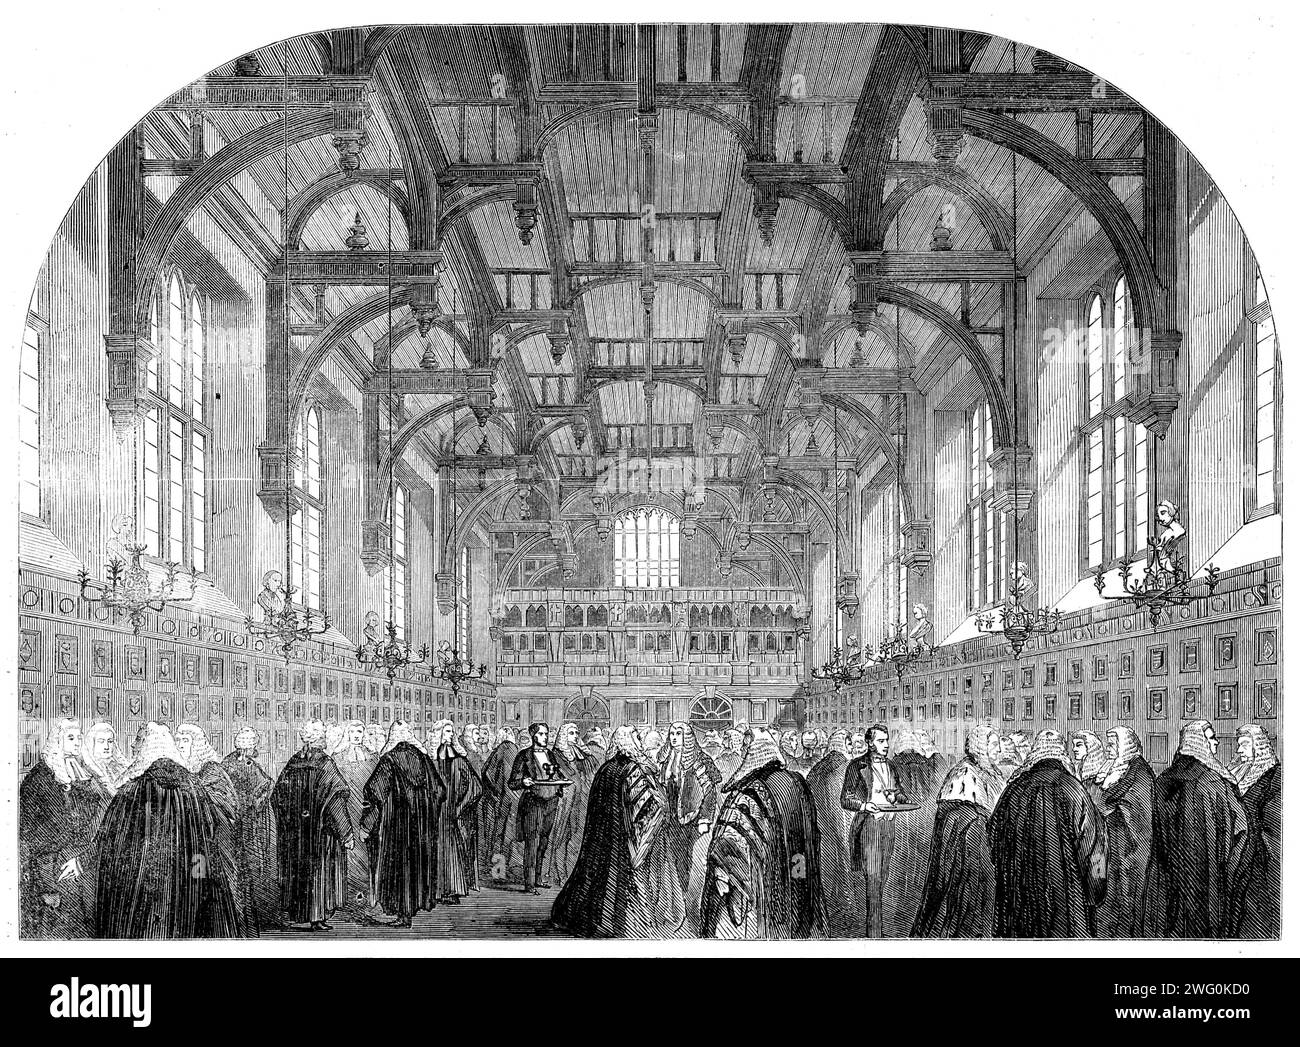 The Lord Chancellor receiving the Judges in the Middle Temple, [London], 1862. 'The Lord Chancellor's lev&#xe9;e. On Monday week the Courts of Law met after the long vacation. According to custom, the Lord Chancellor [Richard Bethell] held a lev&#xe9;e, which was attended by the Judges and the leading members of the Bar; but, instead of following the example of his predecessors and receiving them at his private residence, he met them in the hall of the Middle Temple, of which his Lordship is a Bencher. The Lord Mayor elect (Alderman Rose) was also presented to him. From the Middle Temple Hall Stock Photo